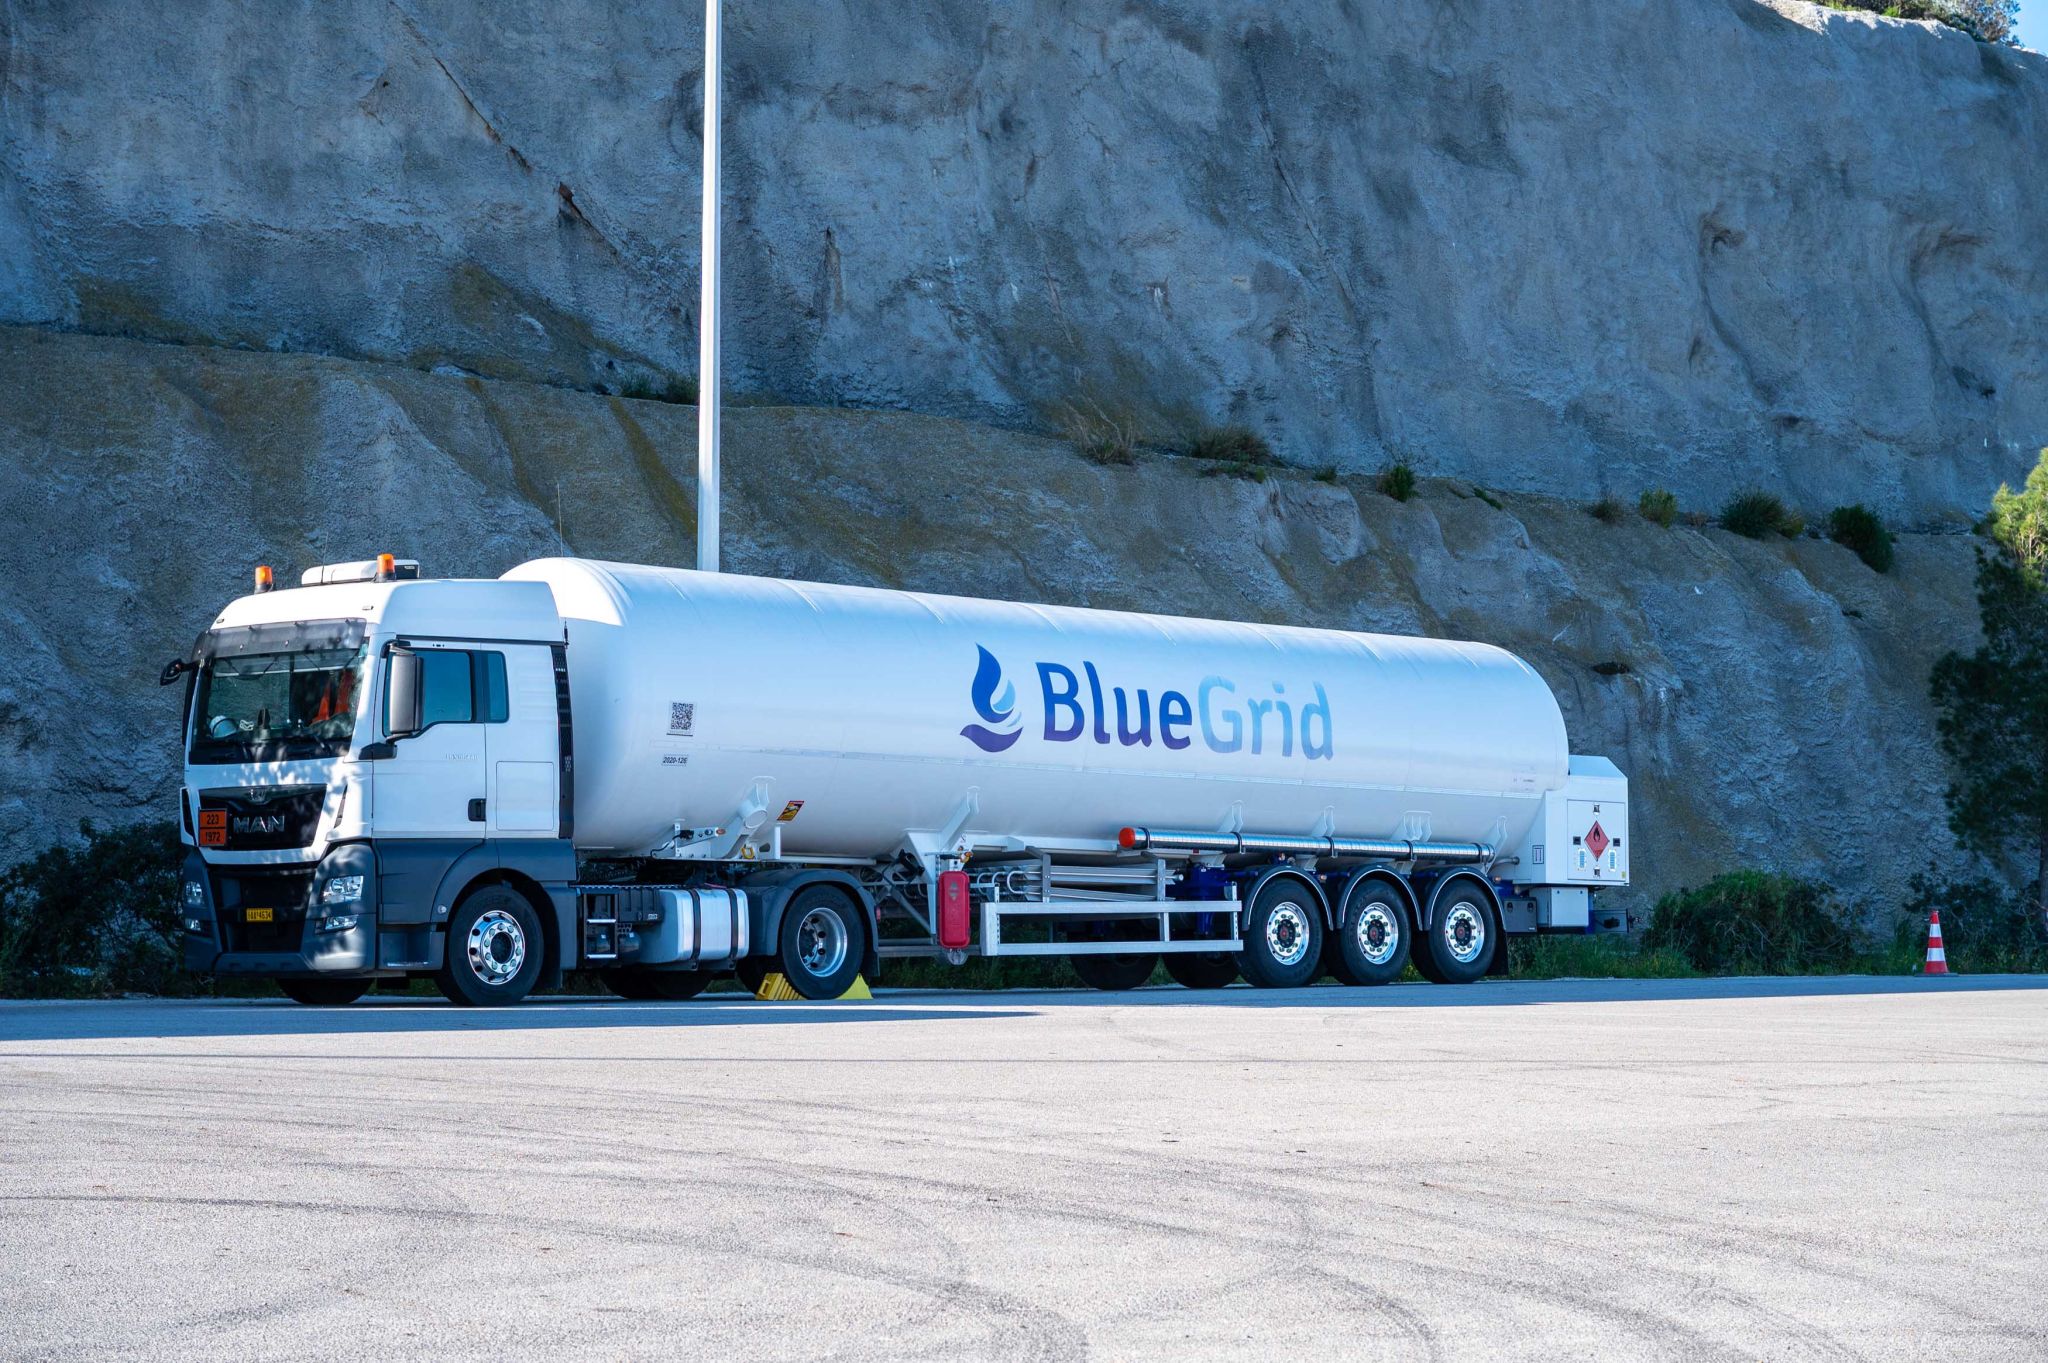 Greece's Blue Grid, Elinoil to launch first LNG station in Q1 2024